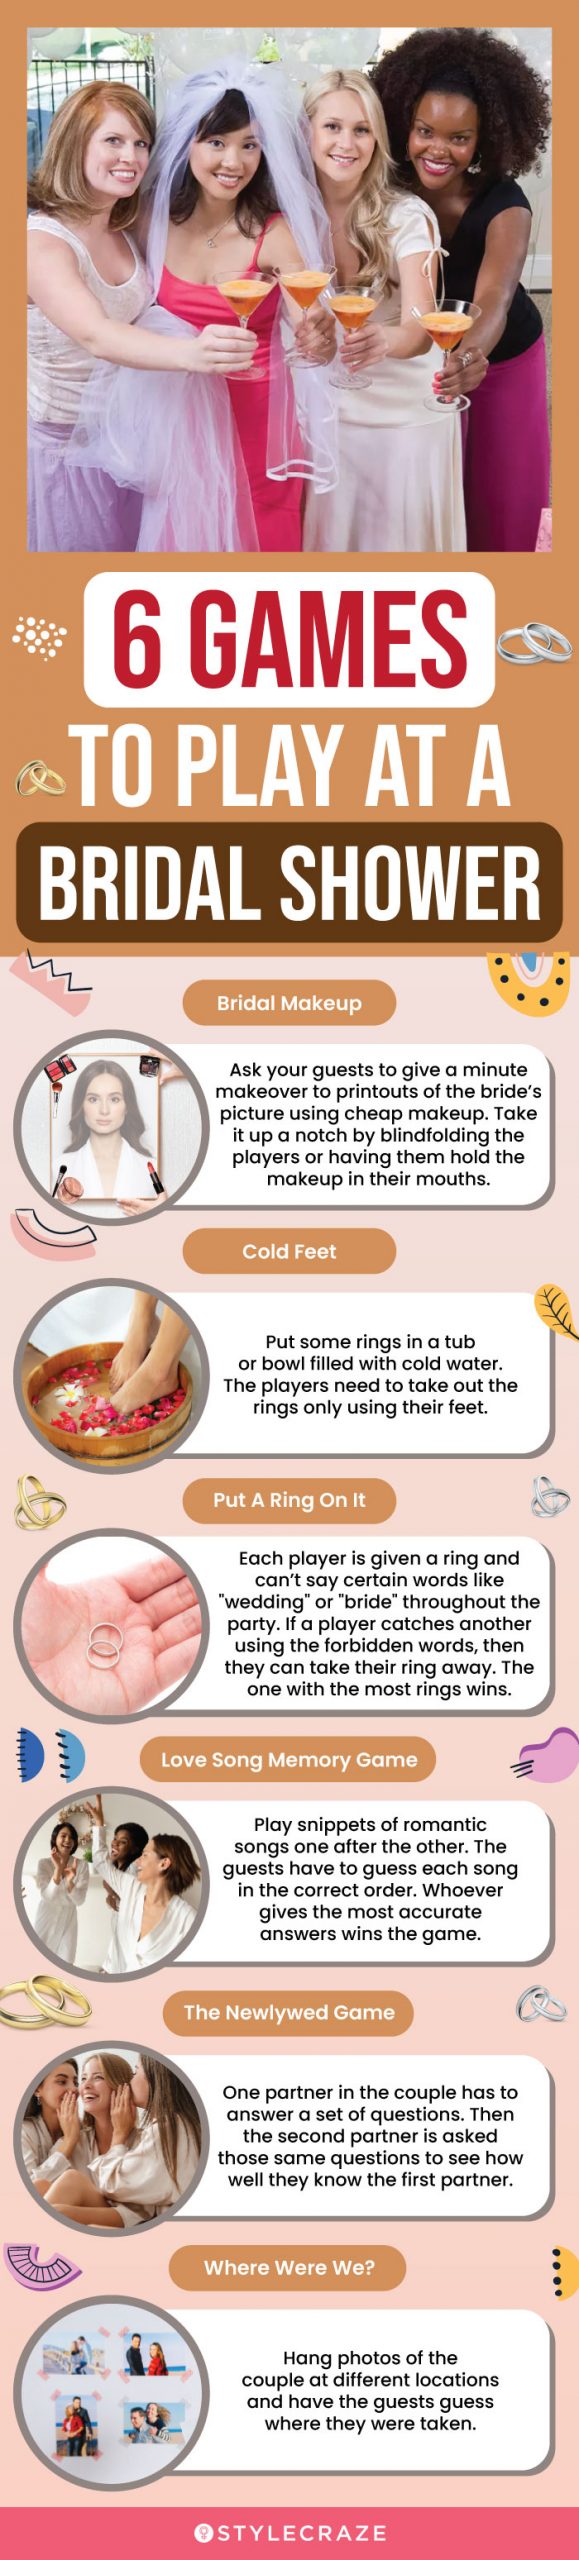 6 games to play at a bridal shower (infographic)